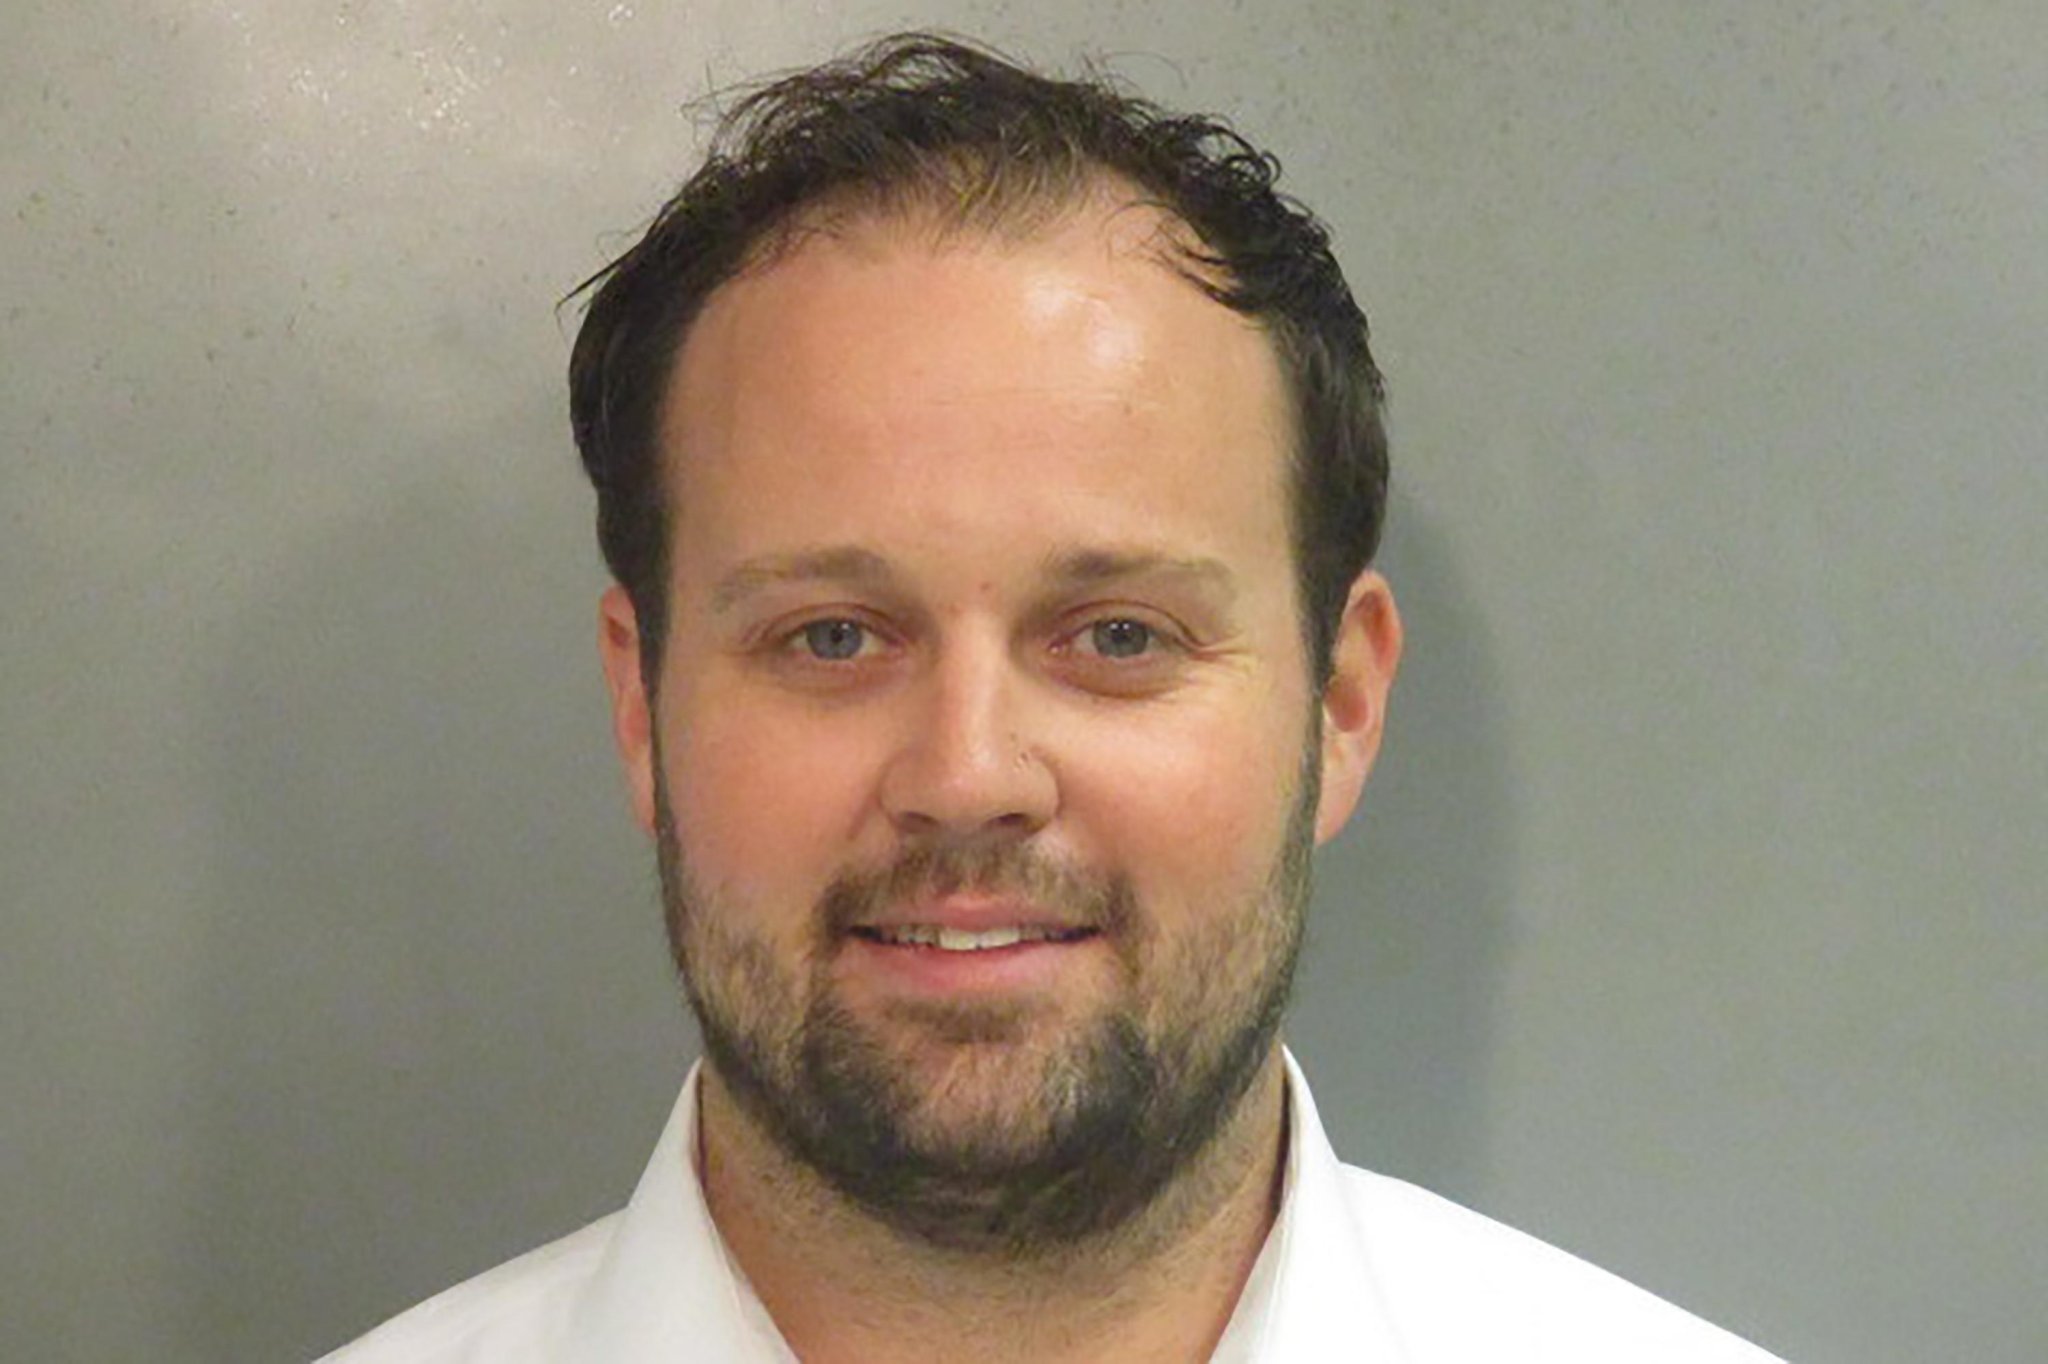 Reality TV’s Josh Duggar gets 12 years in child porn case